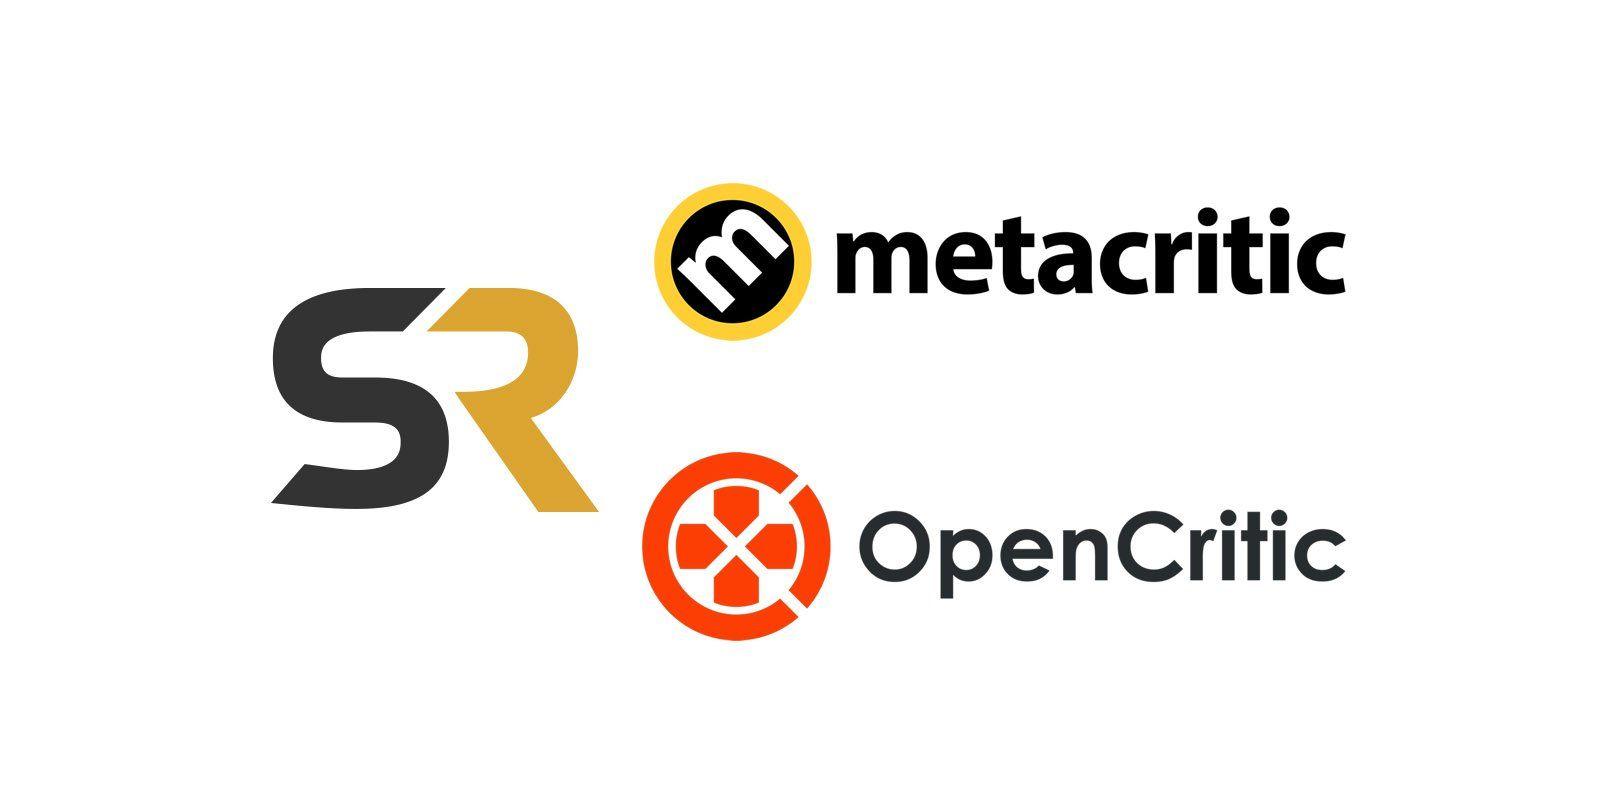 Metacritic Logo - Screen Rant's Video Game Reviews Are On Metacritic & OpenCritic